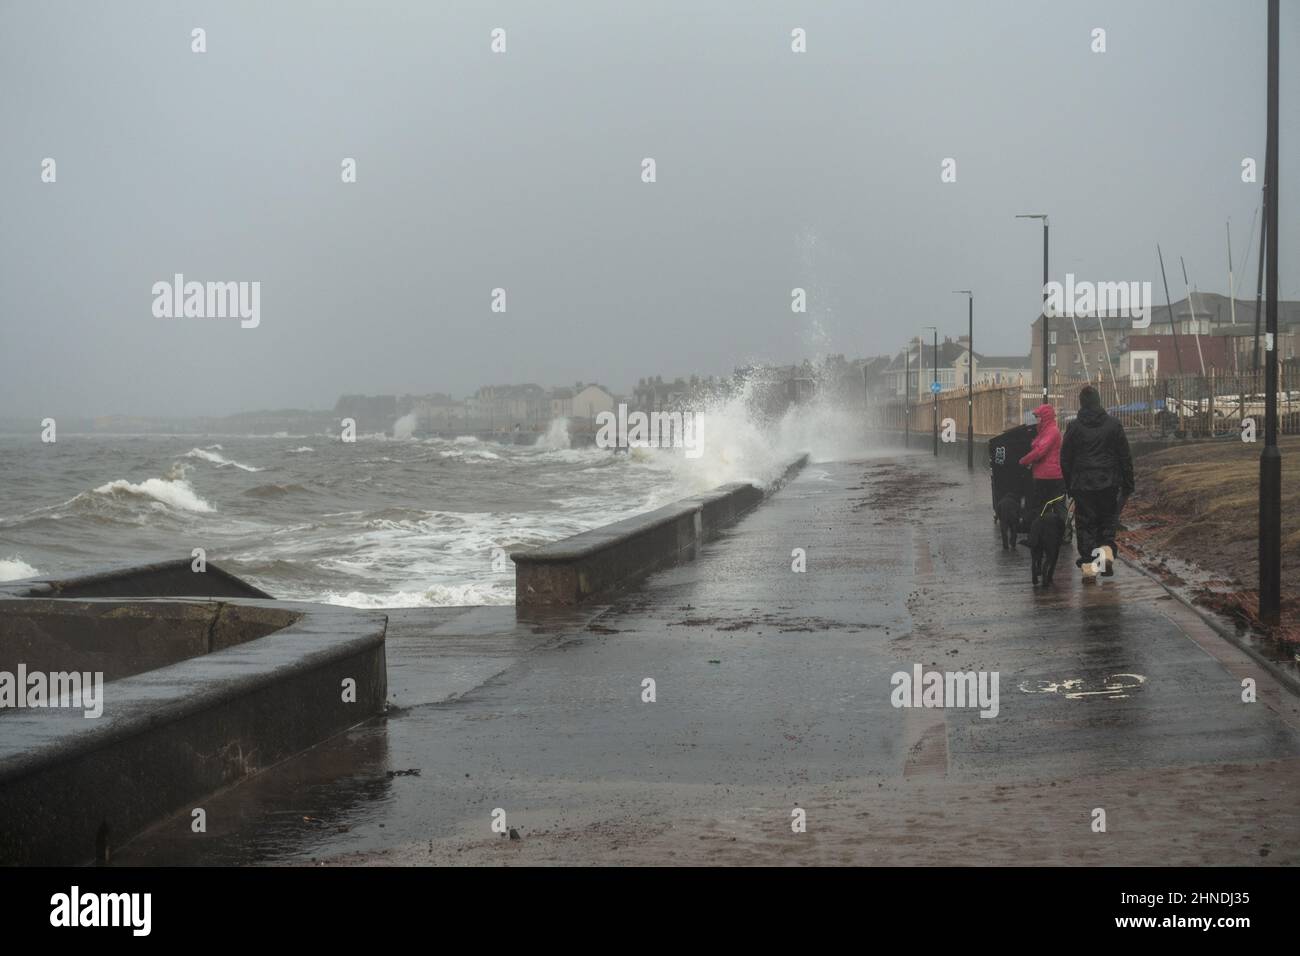 Prestwick, Scotland, UK; 16th February 2022. A High Tide ahead of Storm Dudley brings waves crashing up onto the Promenade at Prestwick Seafront, South Ayrshire.   Two women are walking their dogs along the promenade. Liz Leyden/Alamy Live News Stock Photo